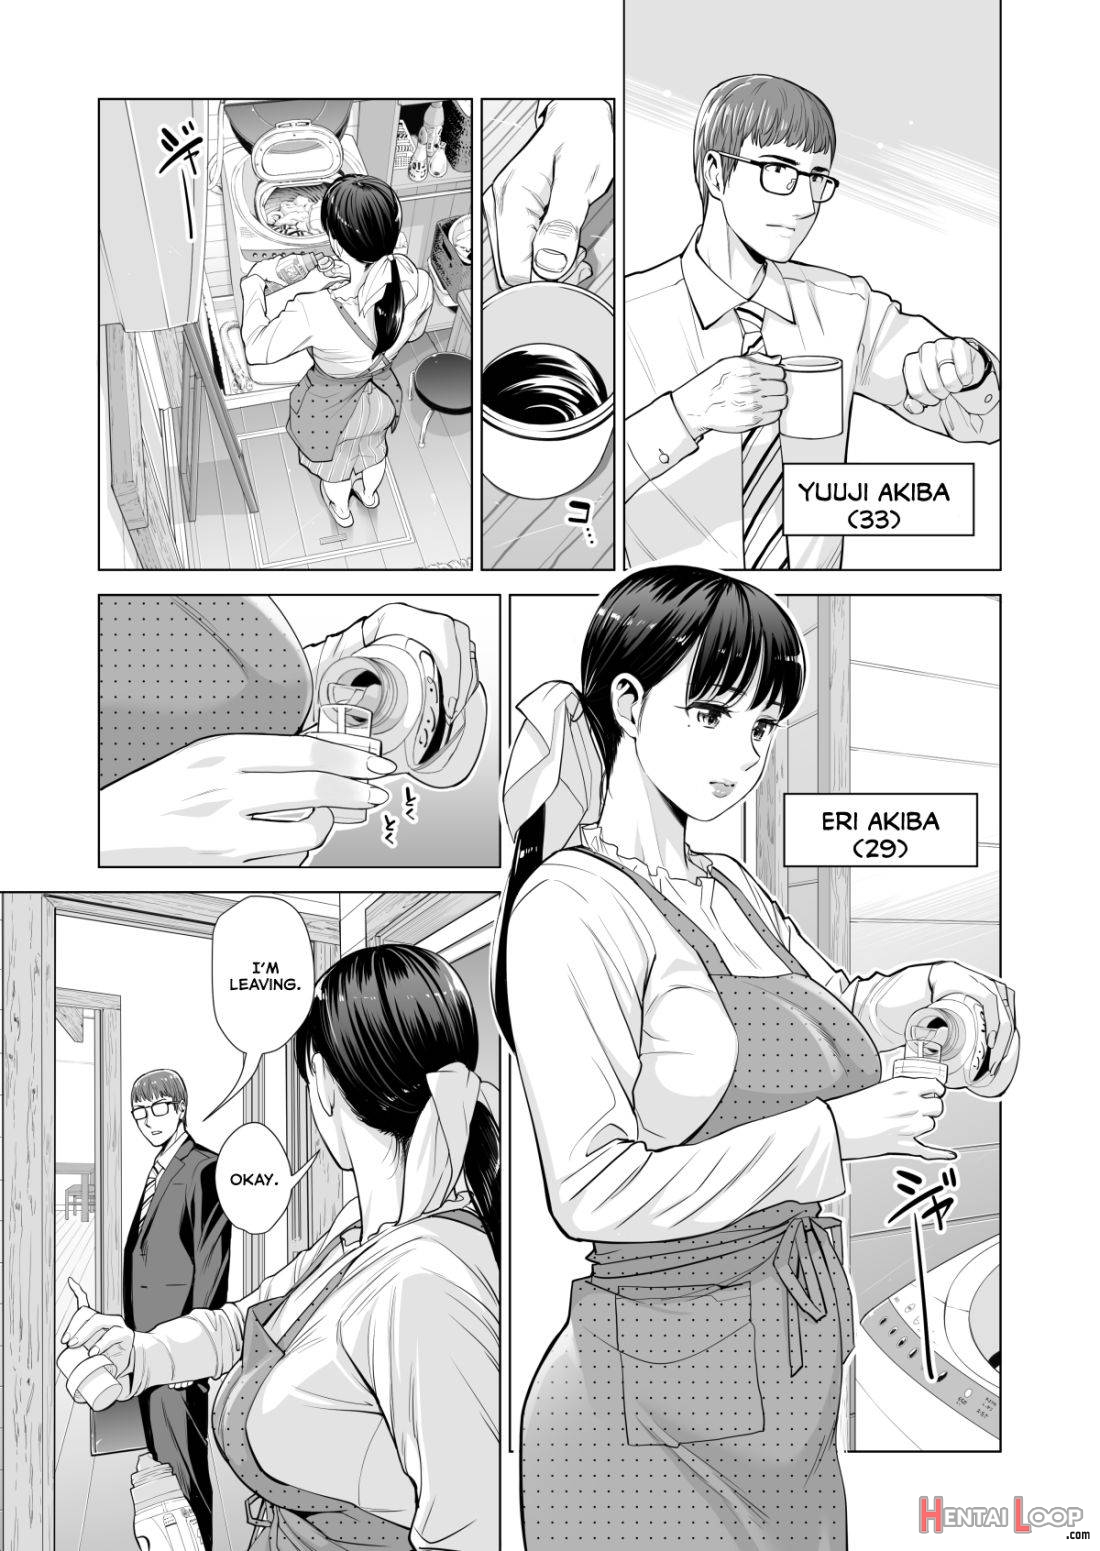 Tsukiyo no Midare Zake (Zenpen) Moonlit Intoxication ~ A Housewife Stolen by a Coworker Besides her Blackout Drunk Husband ~ Chapter 1 page 5